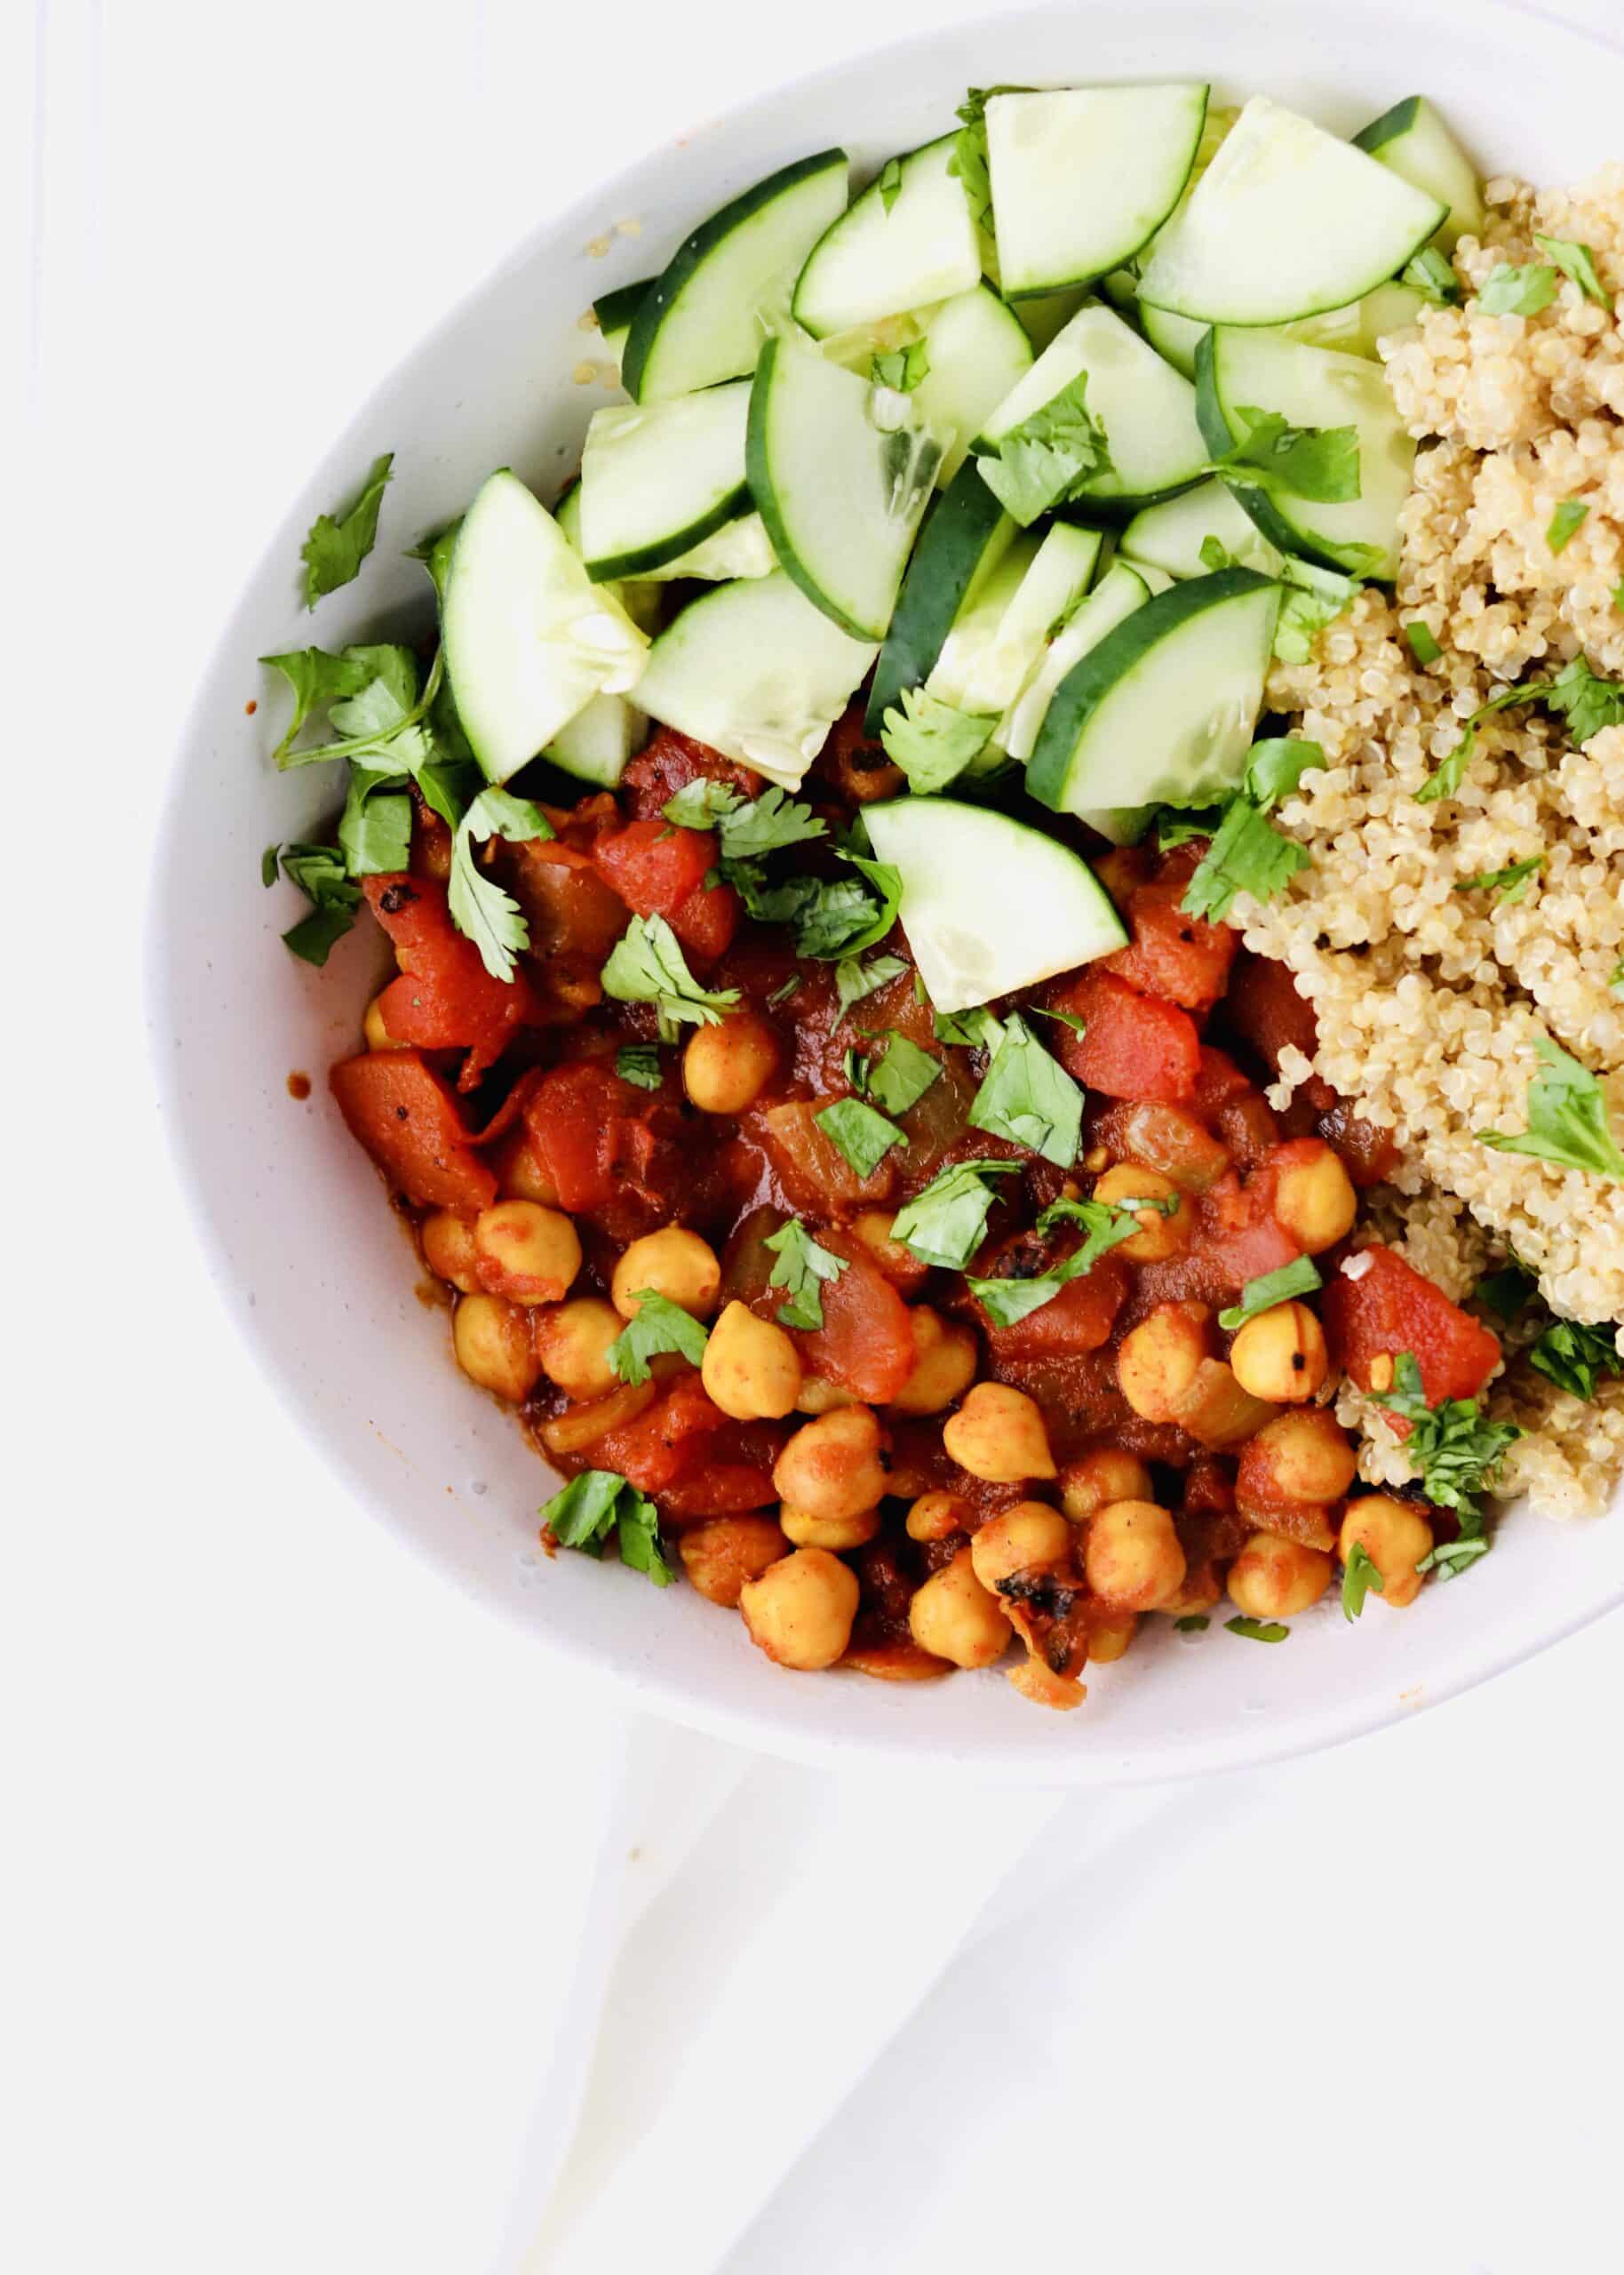 Moroccan Chickpea Bowls are perfect for your healthy eating goals. Plant based protein, clean ingredients, perfect for meatless Monday, easily made vegan, and made in just 30 minutes. Recipe at KathleensCravings.com #KathleensCravings #meatlessmonday #plantbased #cleaneating #vegetarian #vegan #chickpeas #quinoa